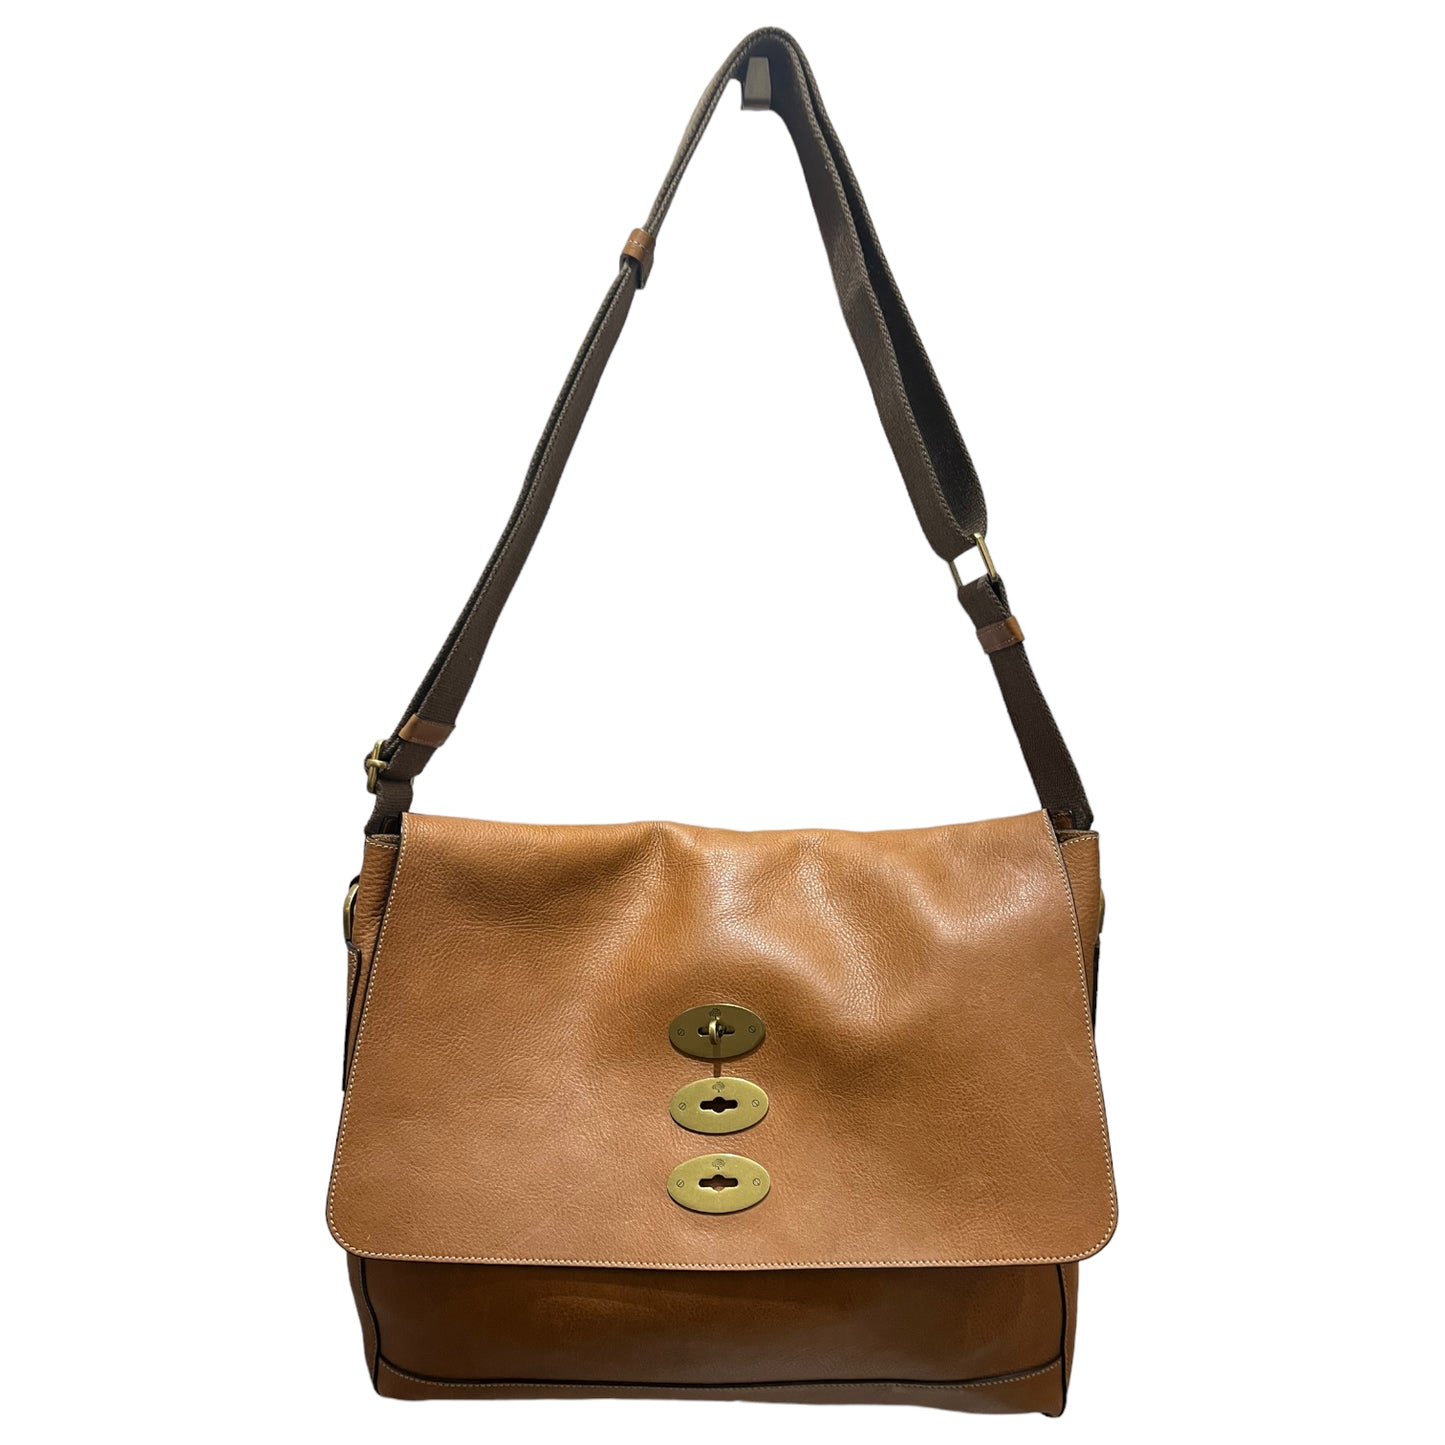 Mulberry Tan Brynmore Bag